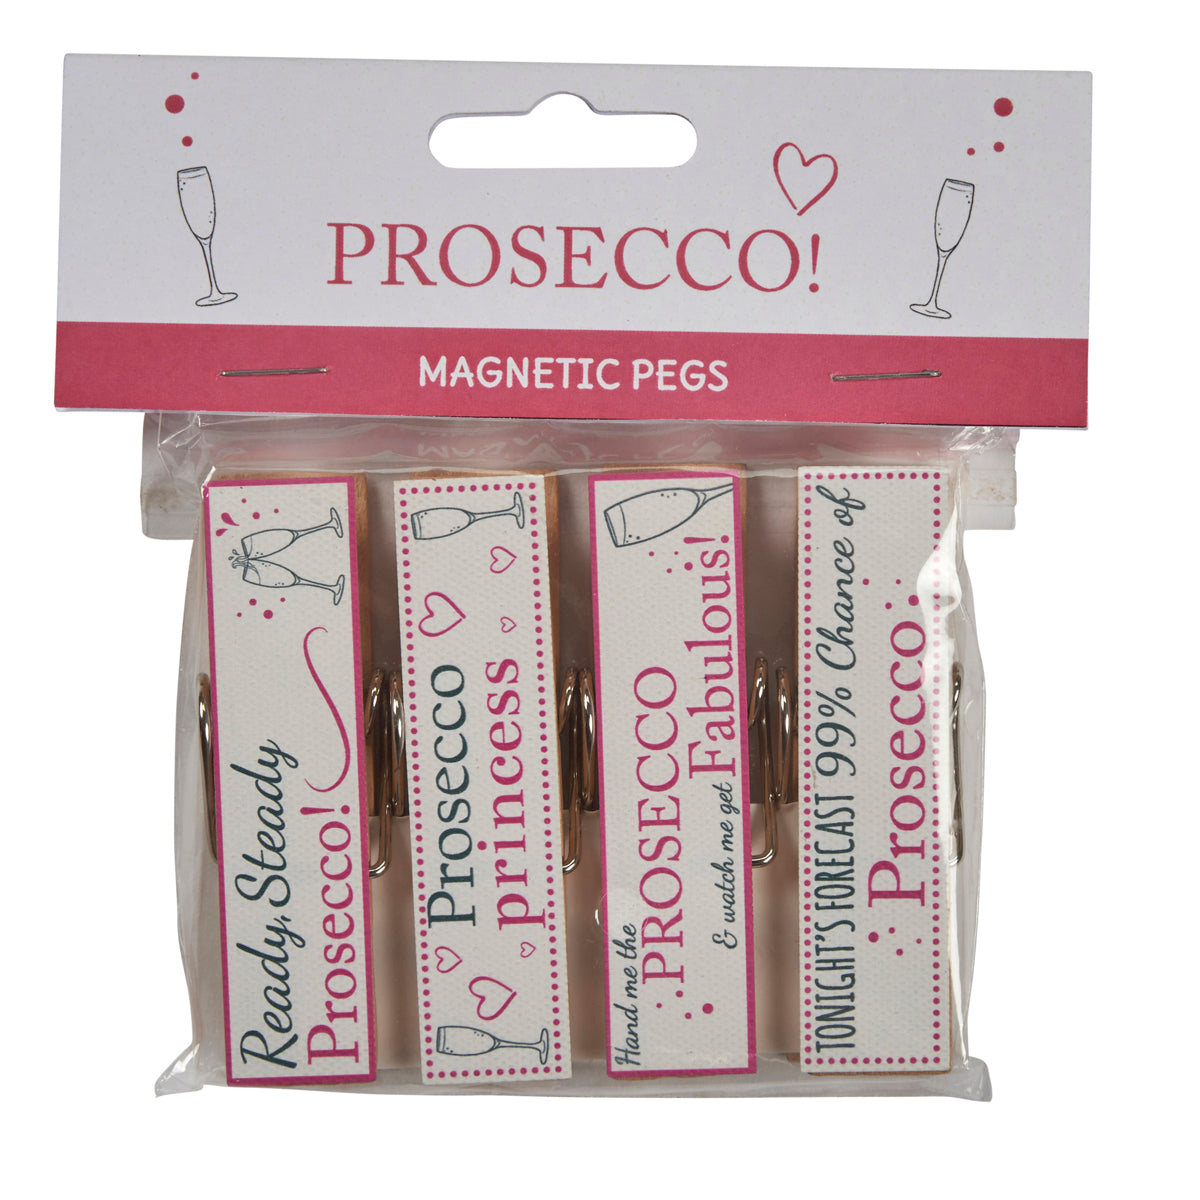 Set of 4 prosecco magnetic pegs